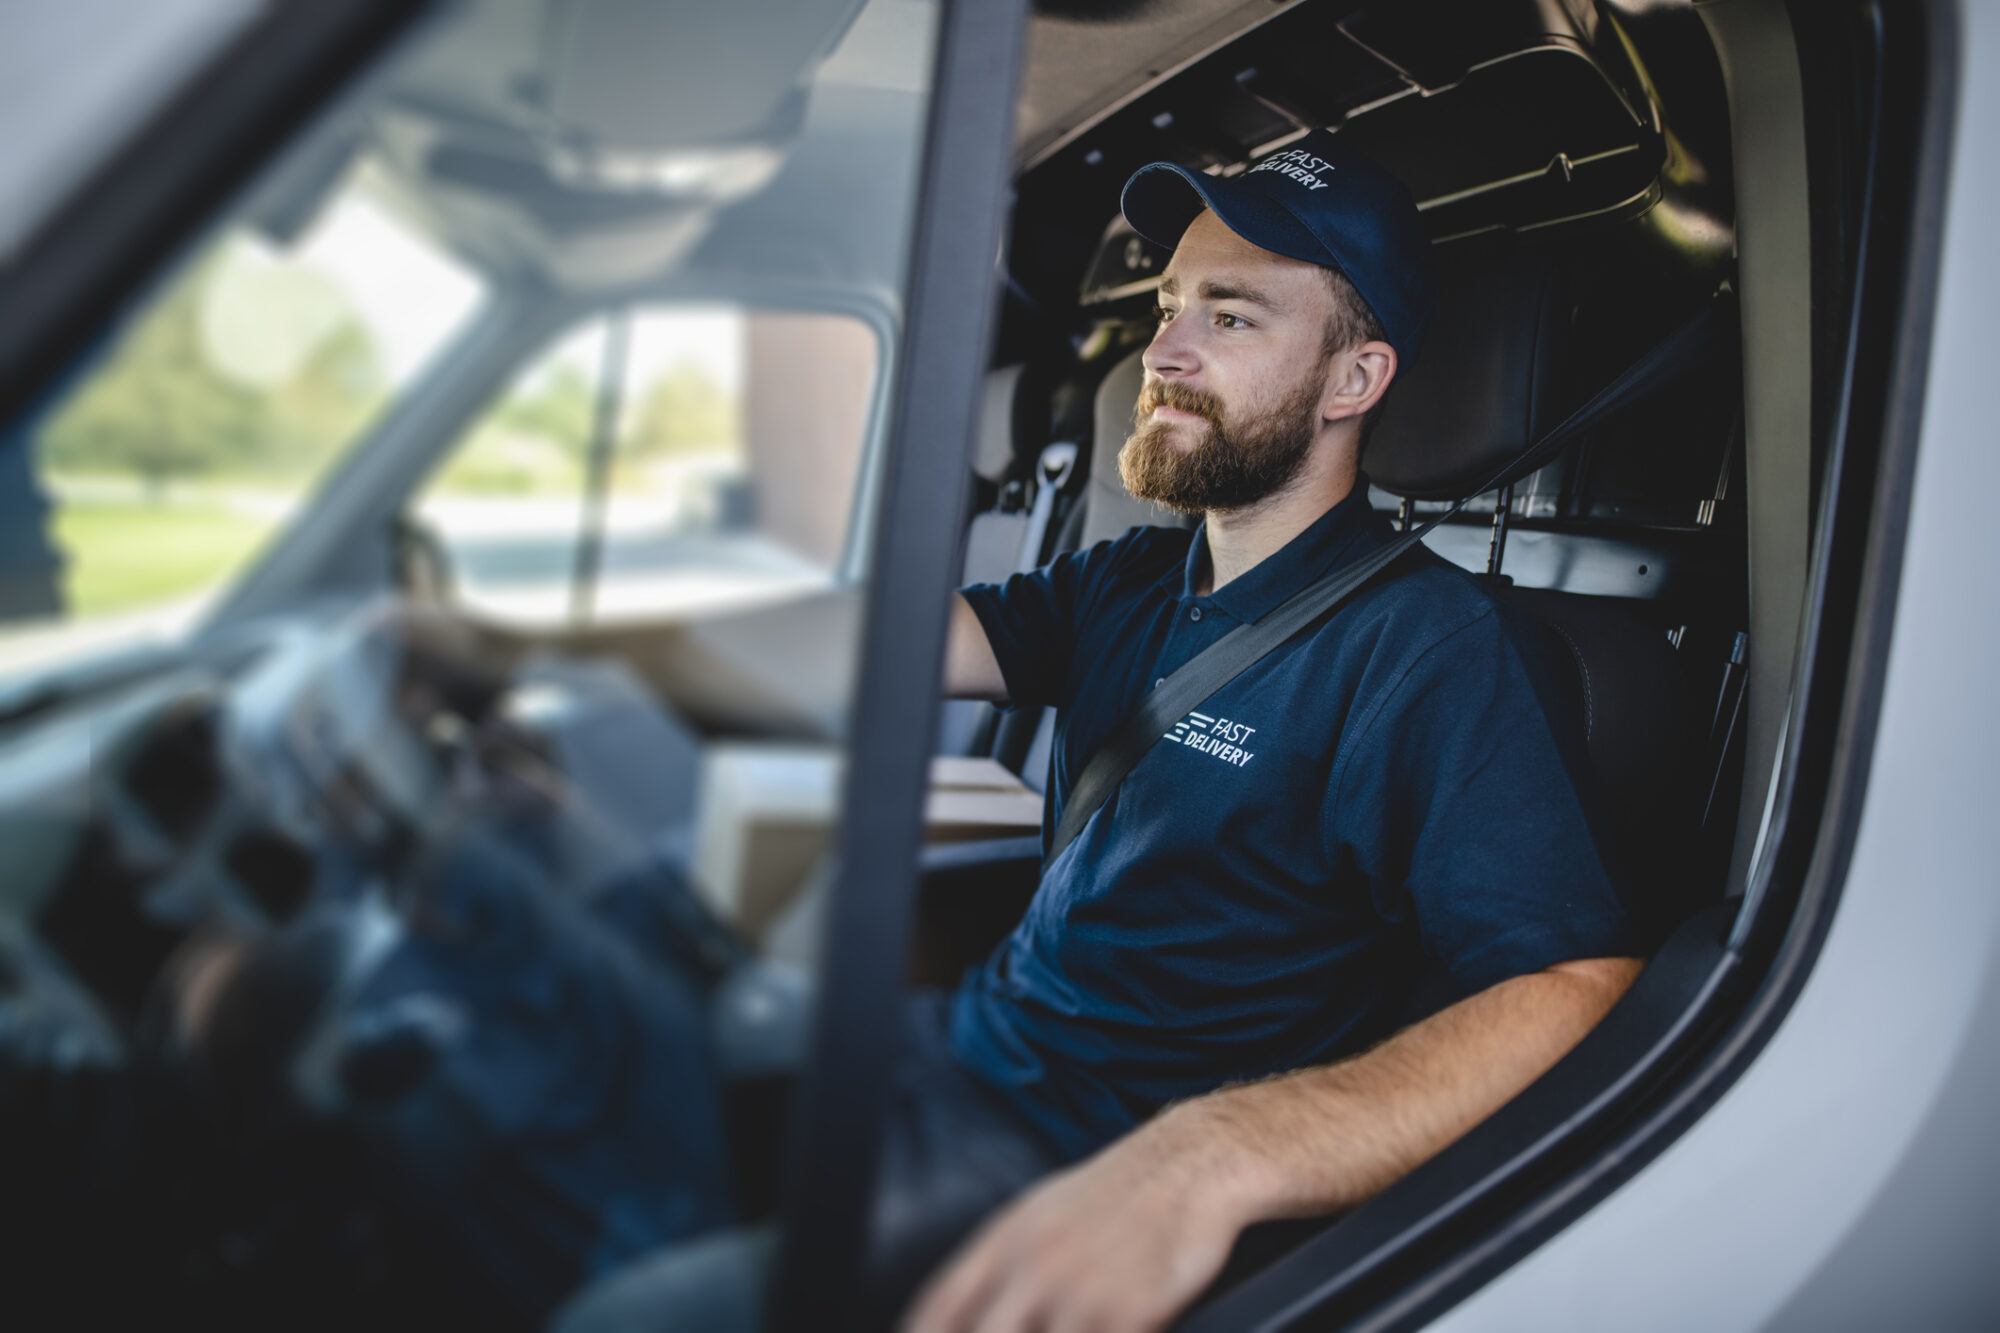 Are you a driver in need of DOT testing in Georgia?